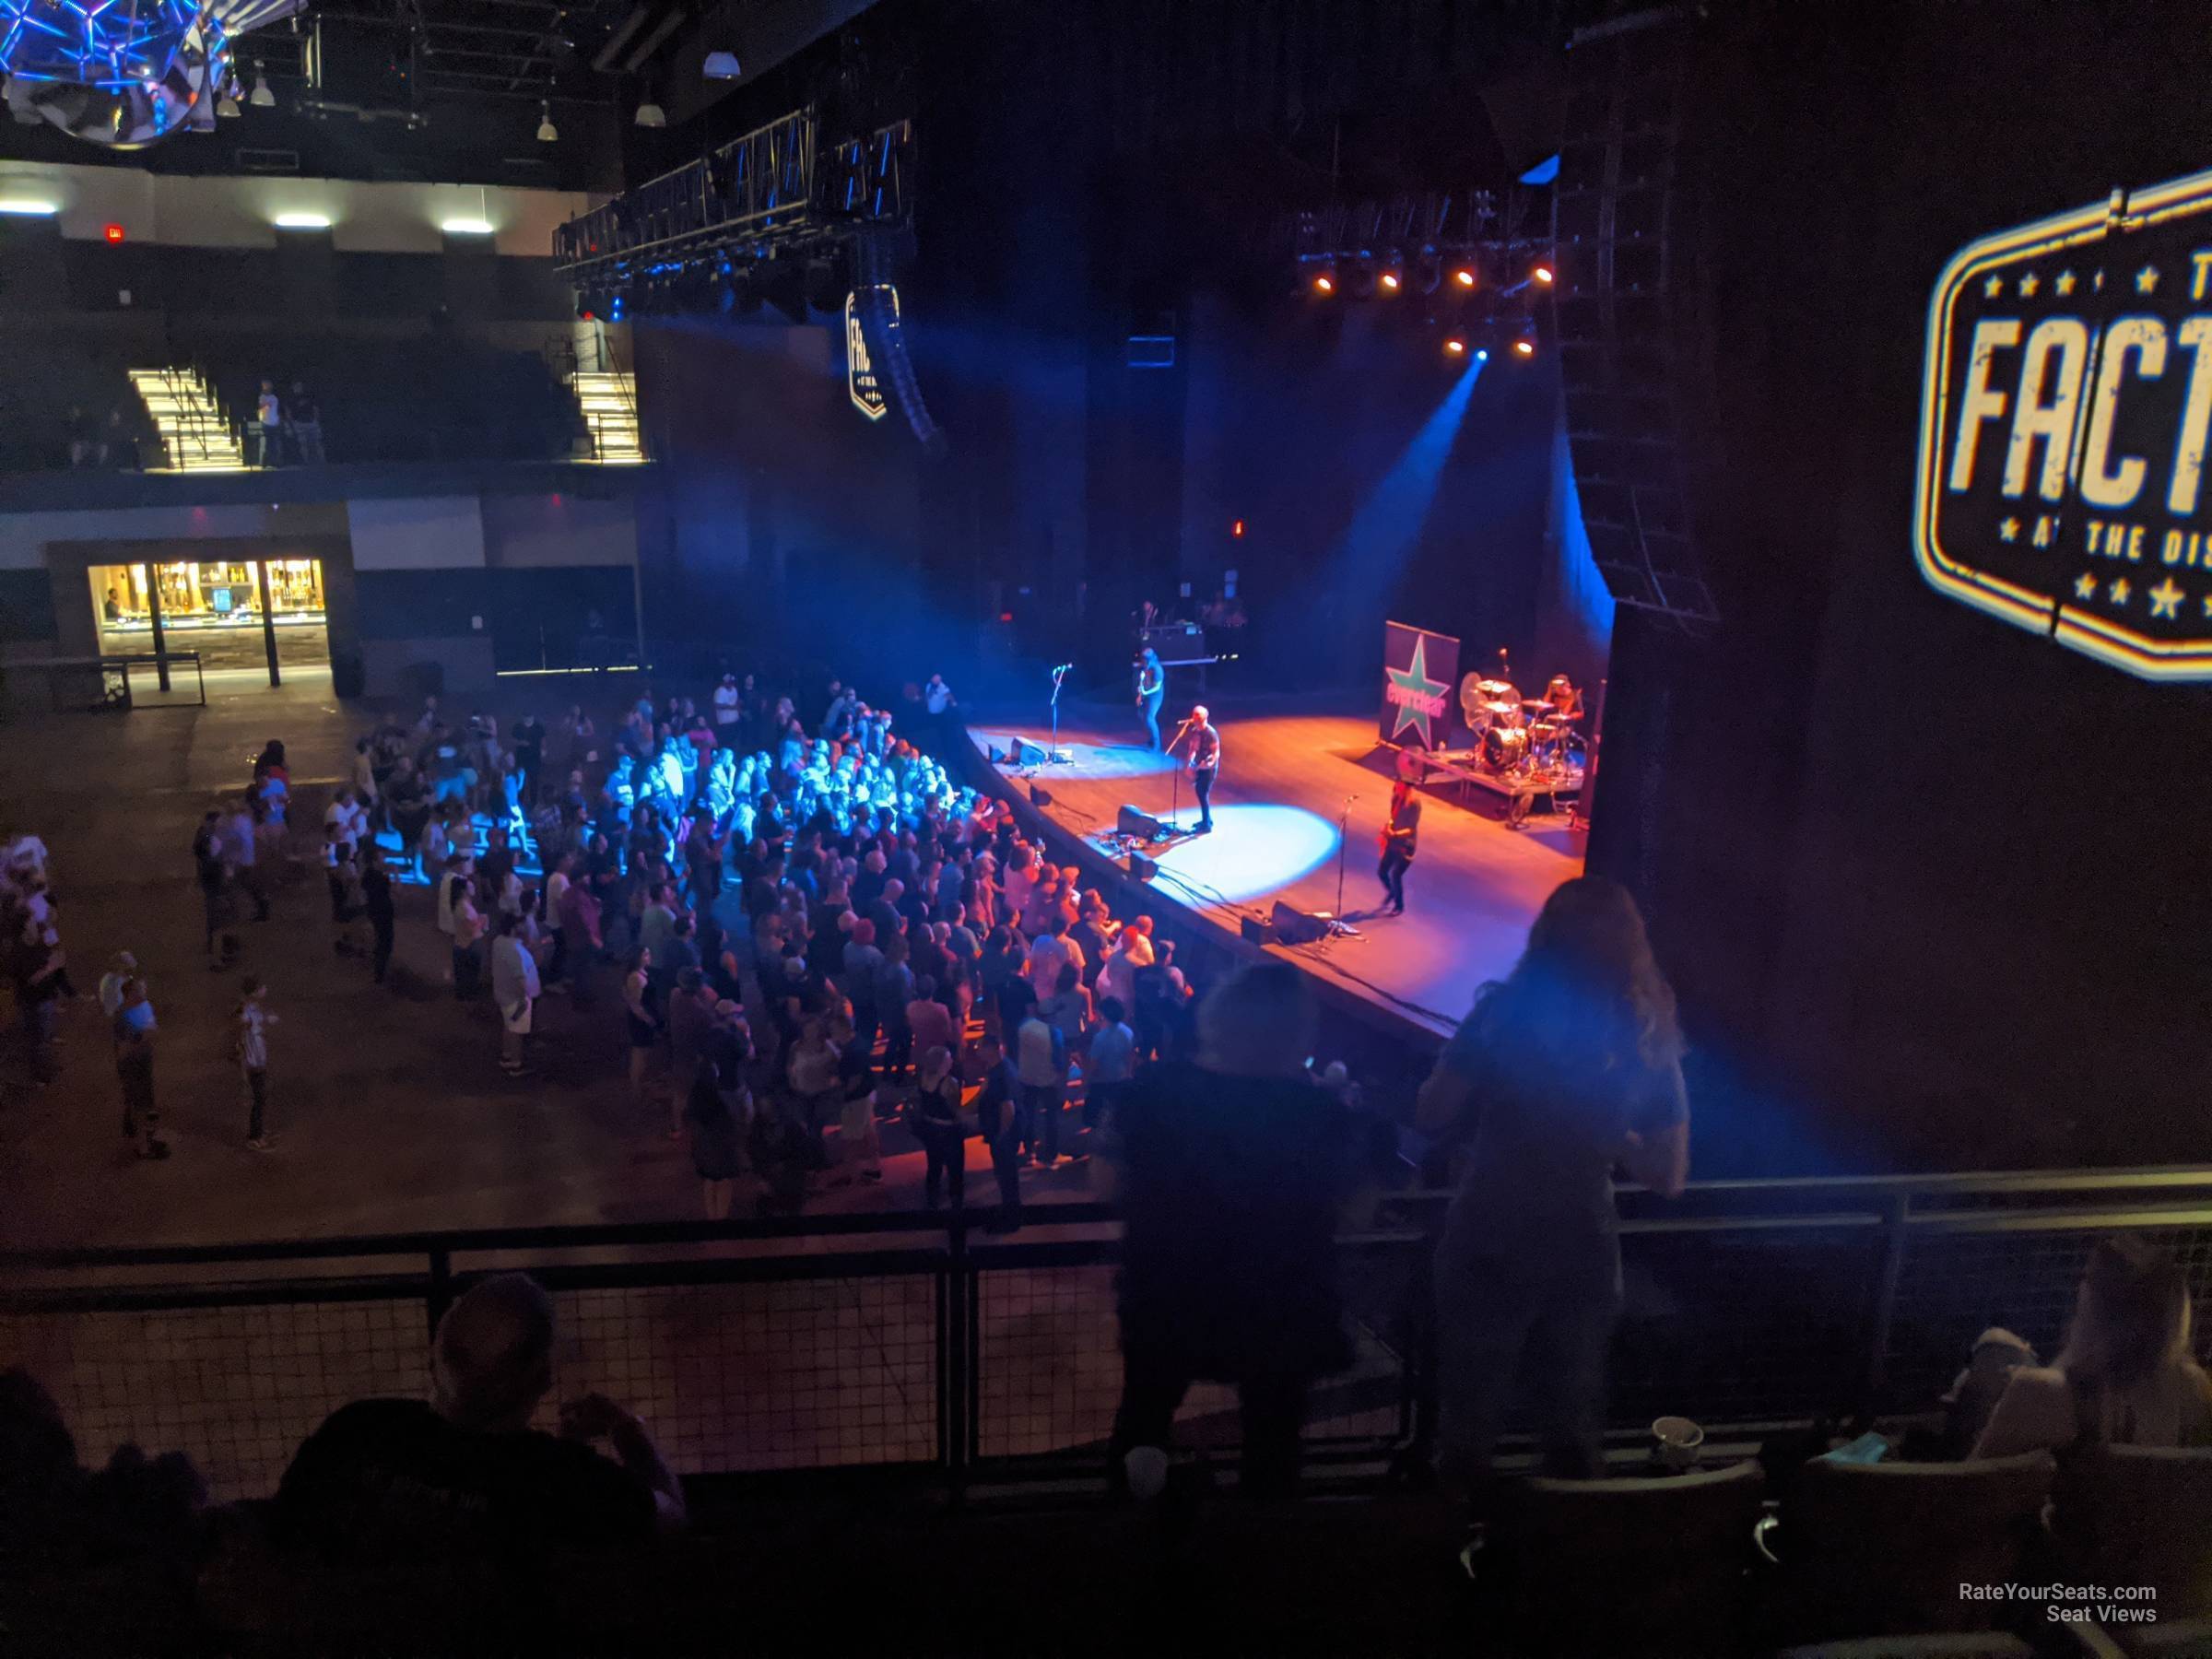 section 201, row d seat view  - the factory - stl